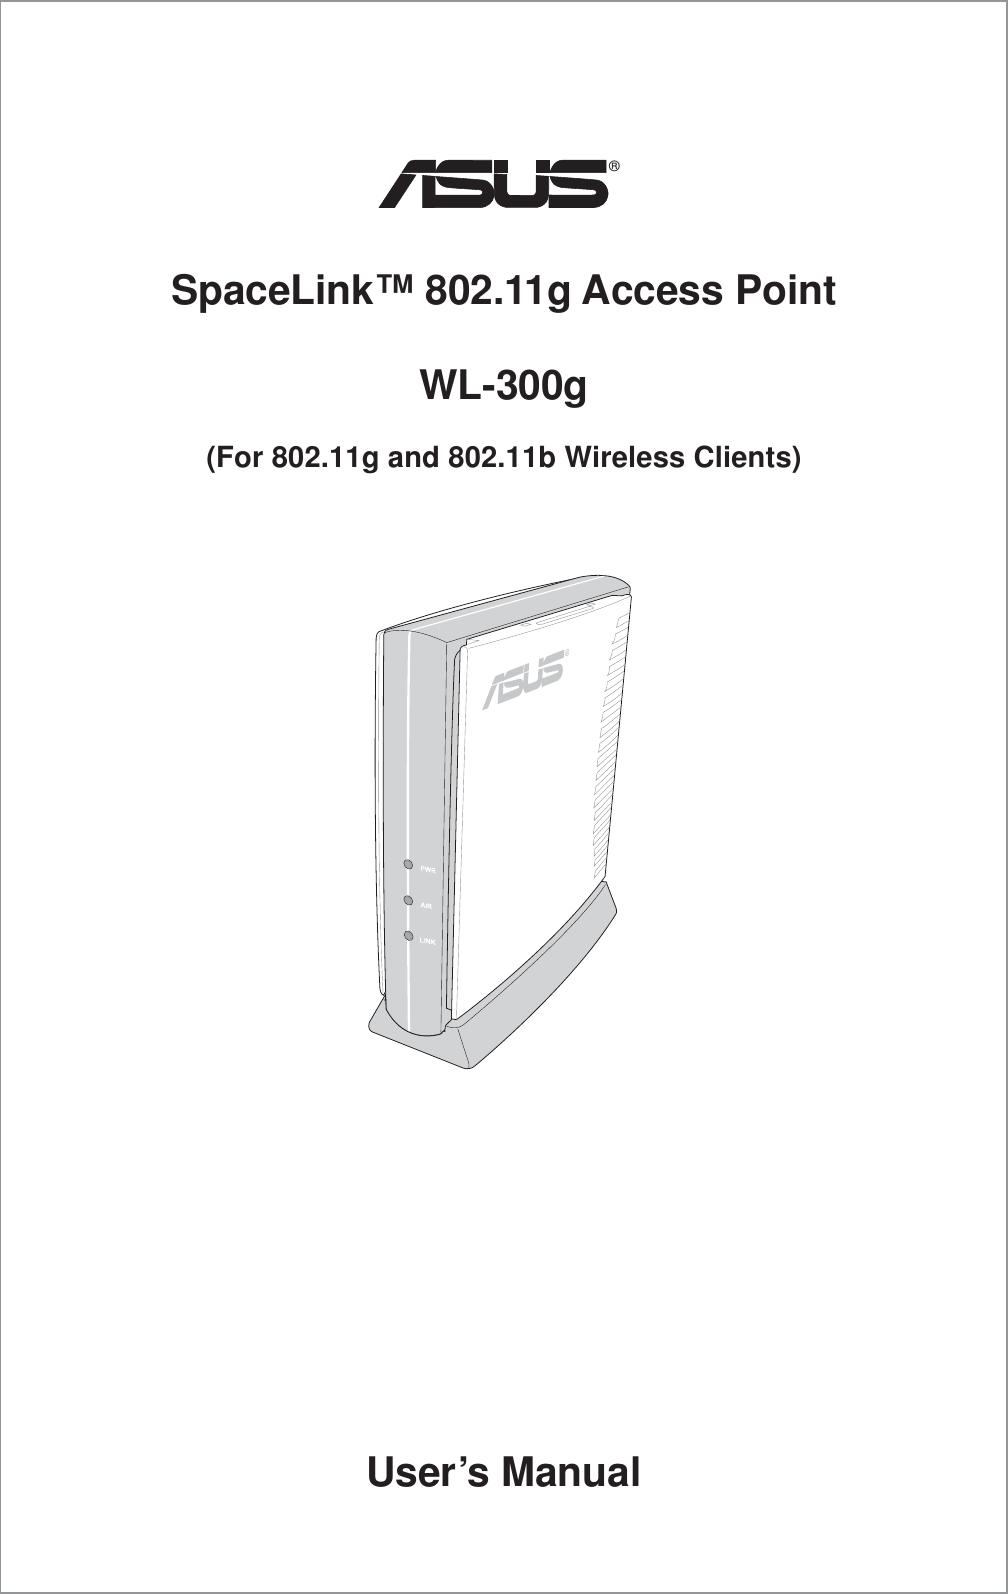 SpaceLink™ 802.11g Access PointWL-300g(For 802.11g and 802.11b Wireless Clients)®User’s Manual